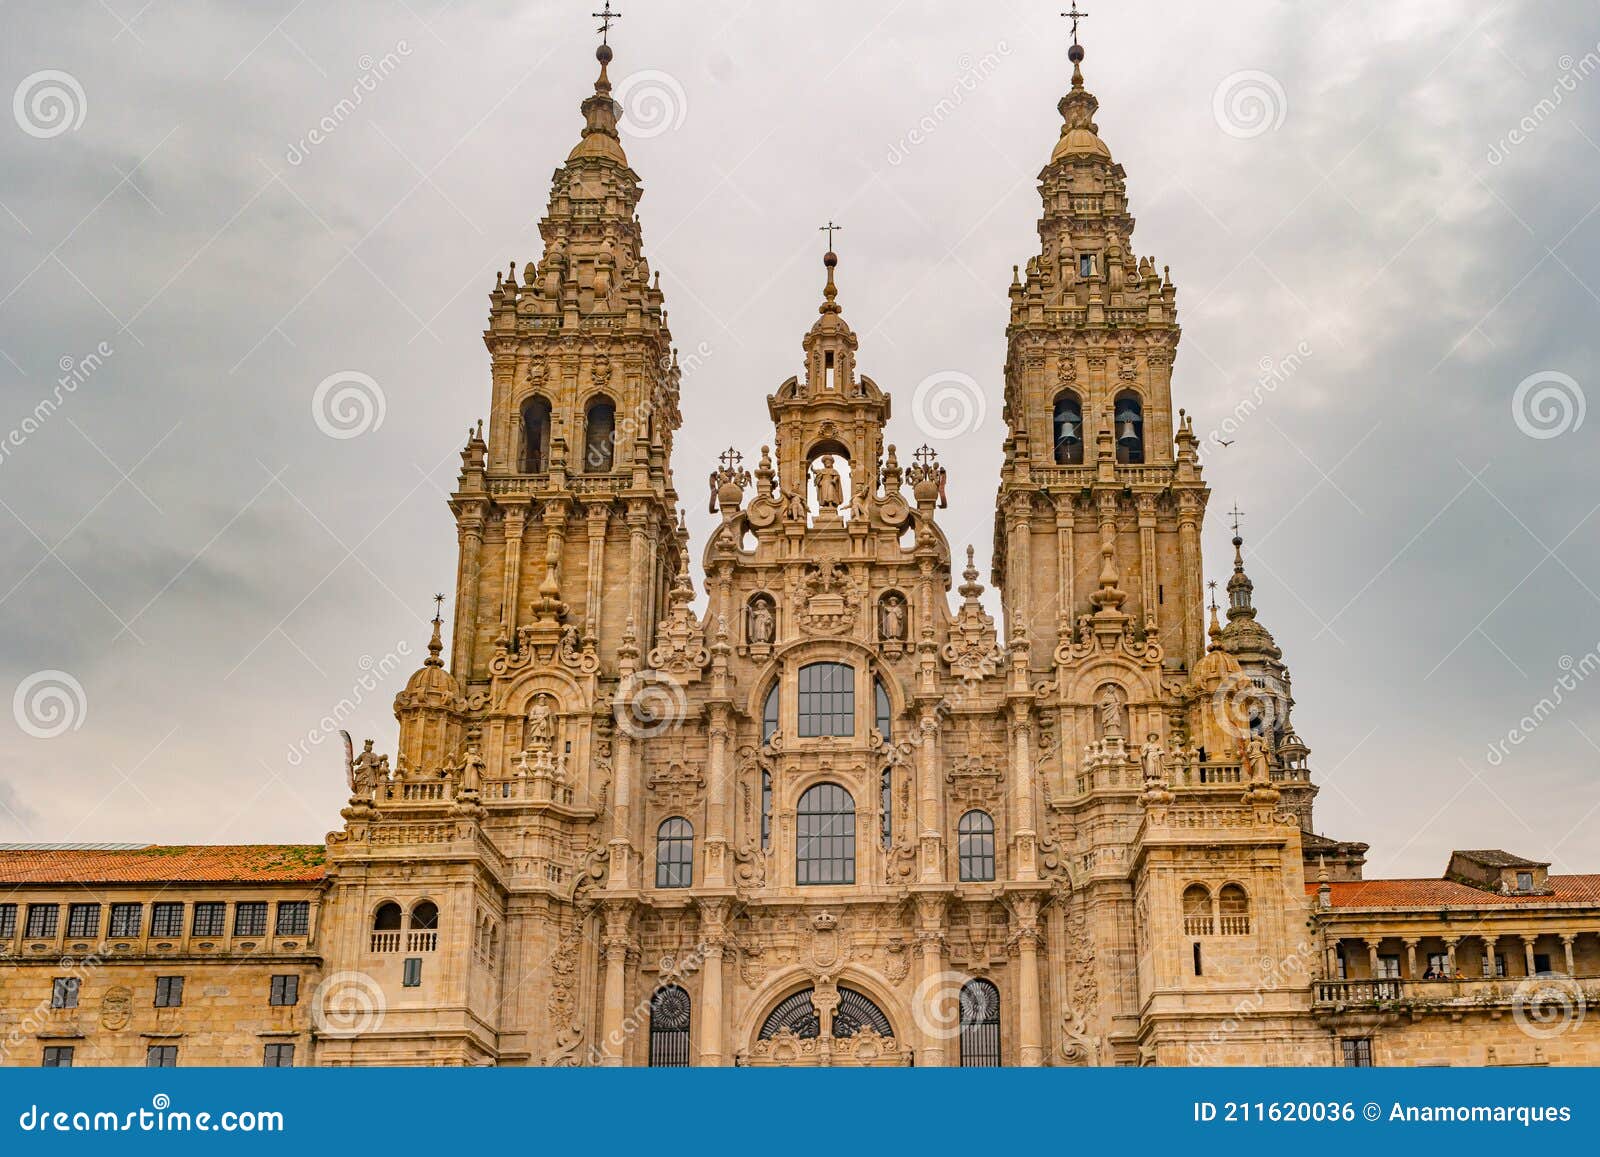 santiago de compostela cathedral view from obradoiro square. cathedral of saint james, spain. galicia, pilgrimage